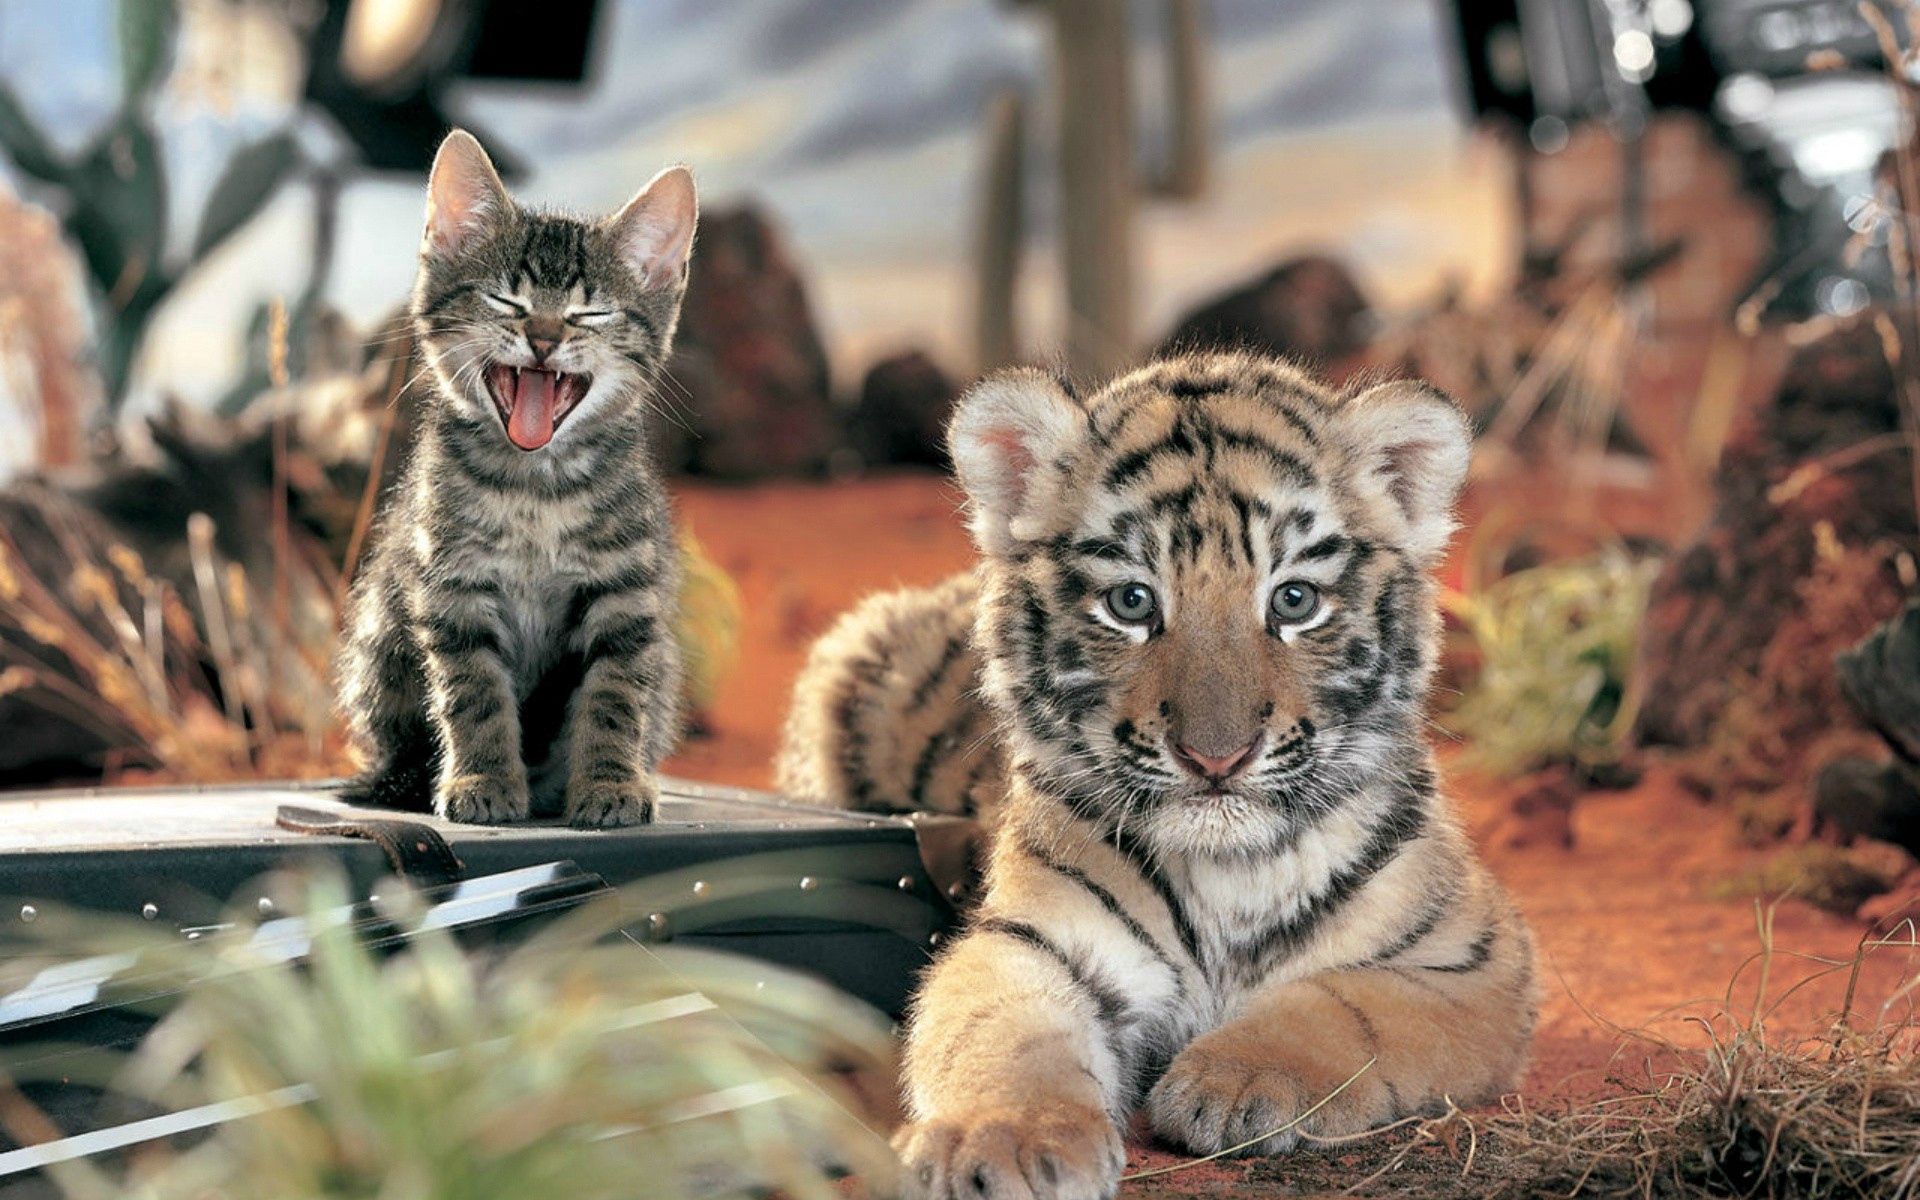 desktop Images cats, animals, kitty, kitten, to lie down, lie, tiger, open mouth, scream, cry, tiger cub